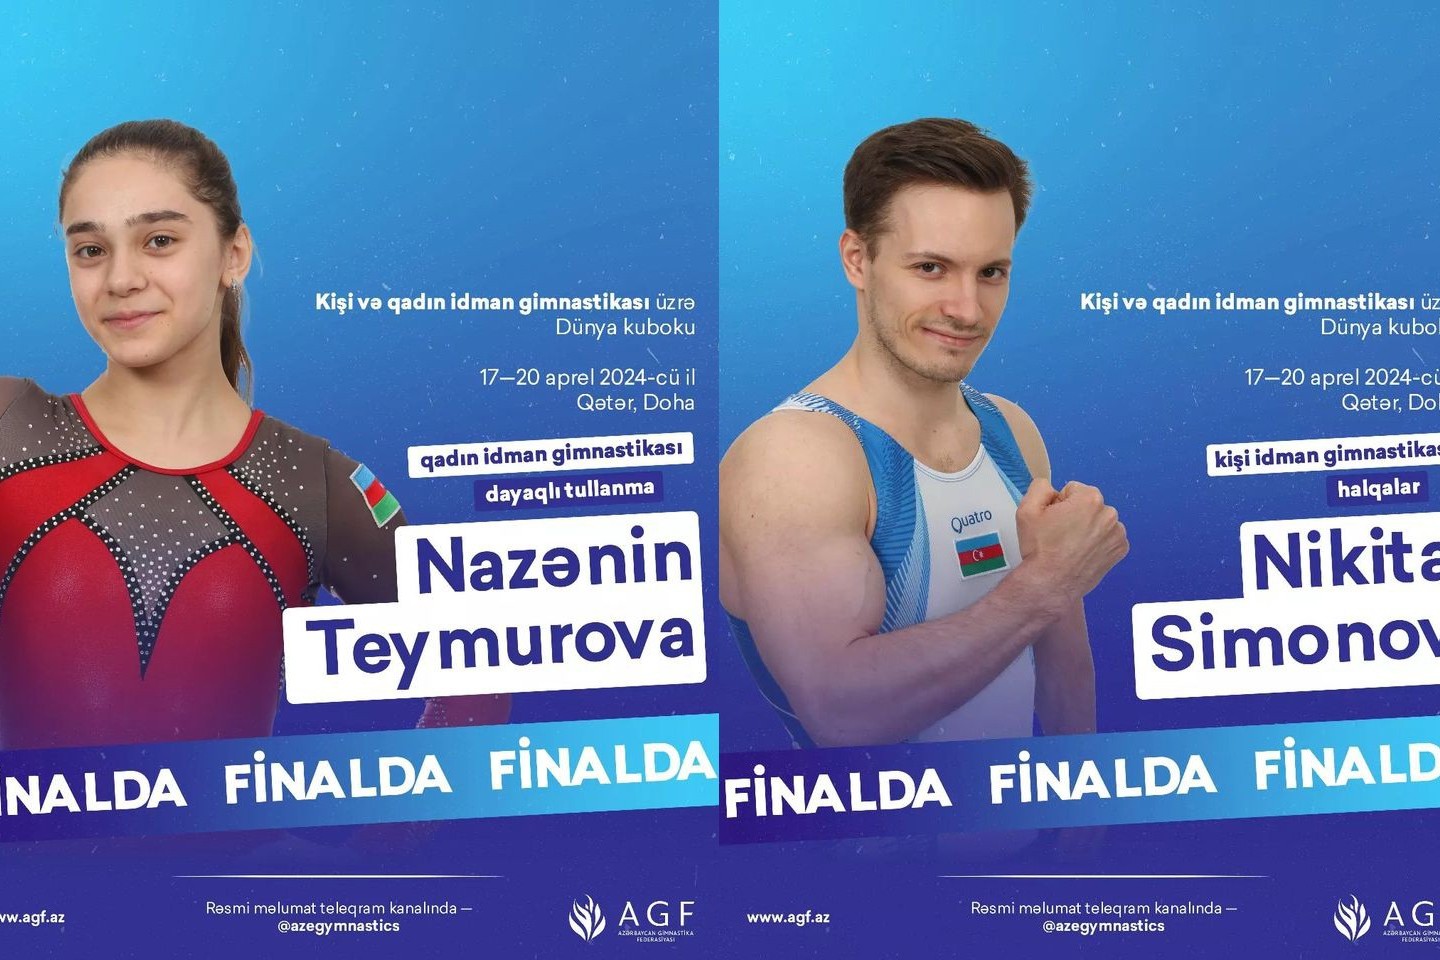 World cup: Azerbaijan’s 2 gymnasts in the final stage